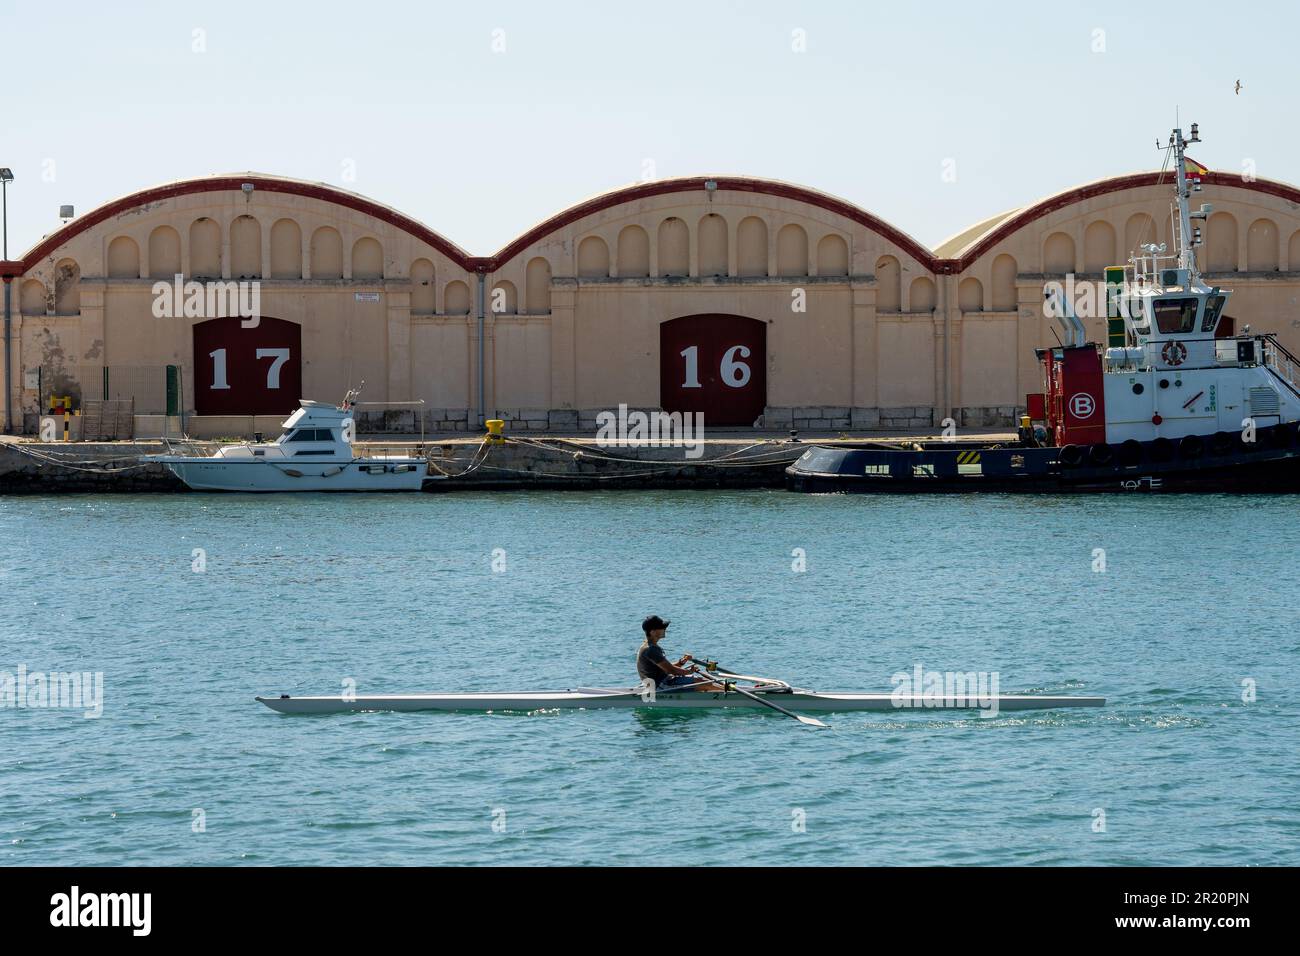 canoe in the harbor with buildings with the numbers 17 and 16 Stock Photo